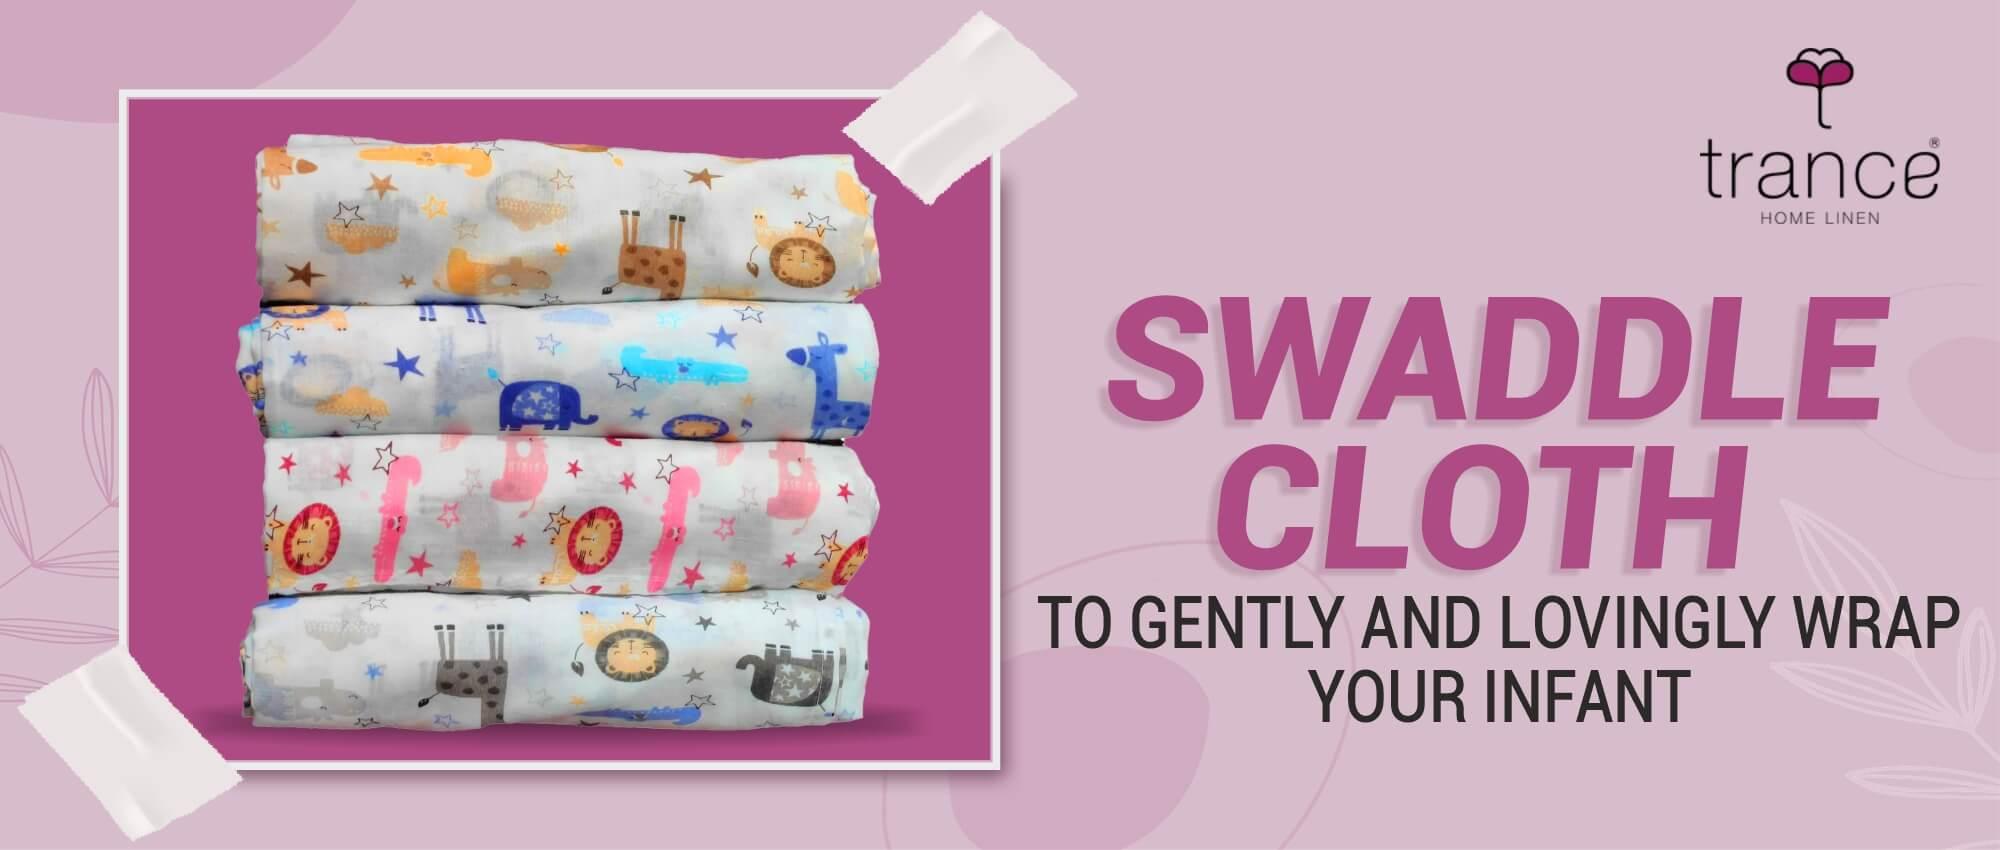 swaddle-cloth-for-babies